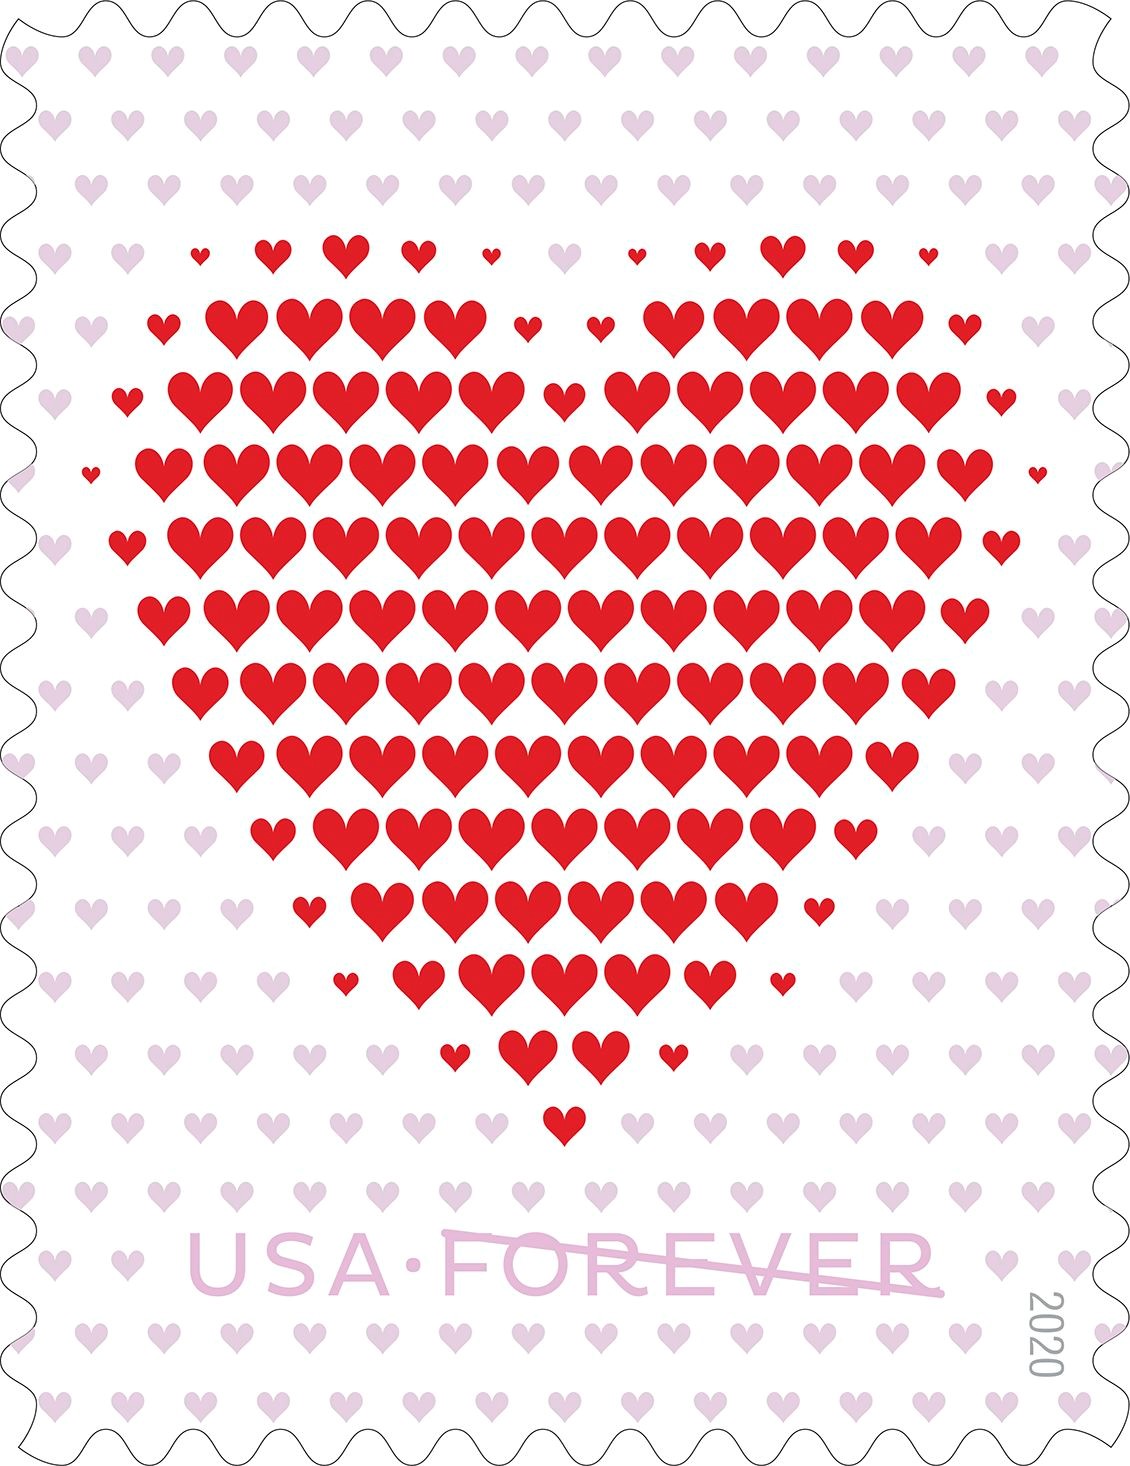 Made of Hearts Love Forever stamp